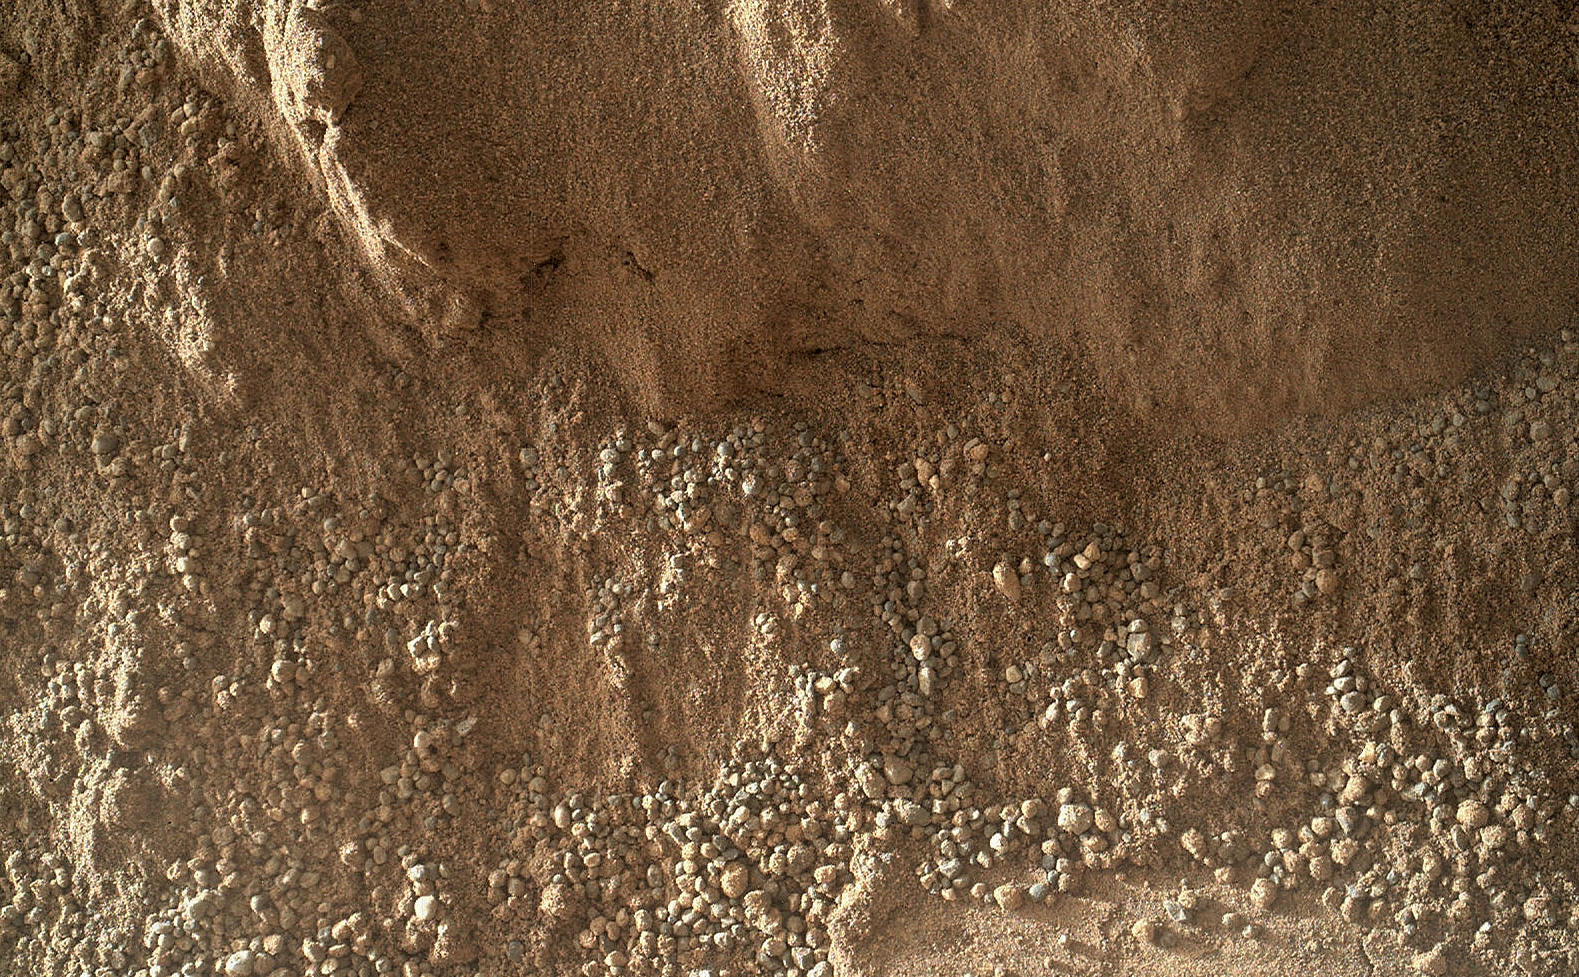 This image shows the wall of a scuffmark NASA's Curiosity made in a windblown ripple of Martian sand with its wheel.